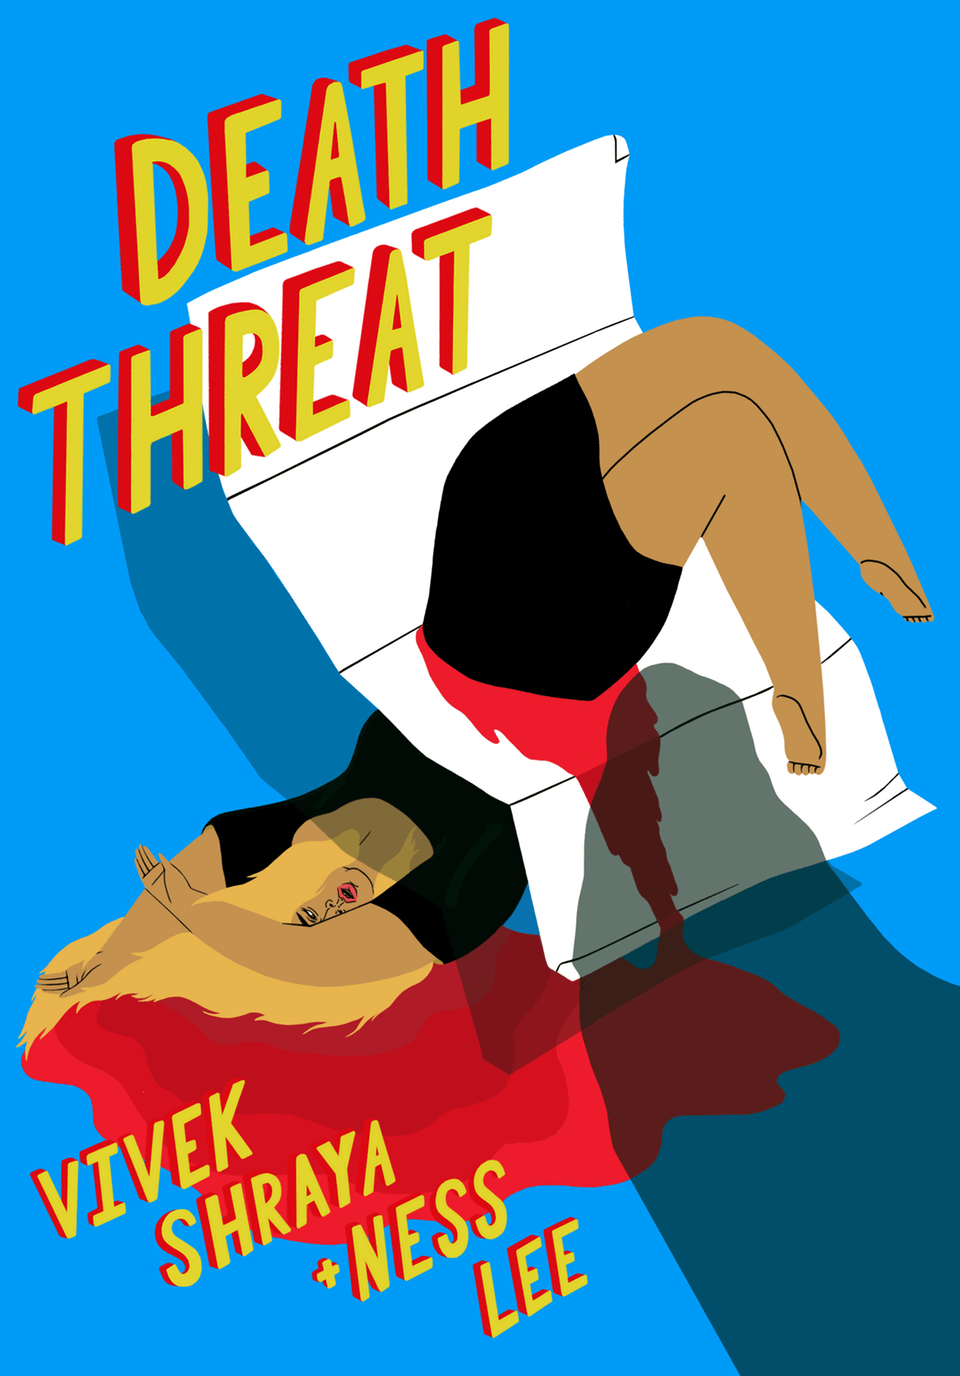 A surreal illustration of a woman being cut in half by a piece of mail, lying in a pool of blood while an indistinct shadow looms from out of frame. Hand-lettered text reads ‘Death Threat. Vivek Shraya and Ness Lee.’